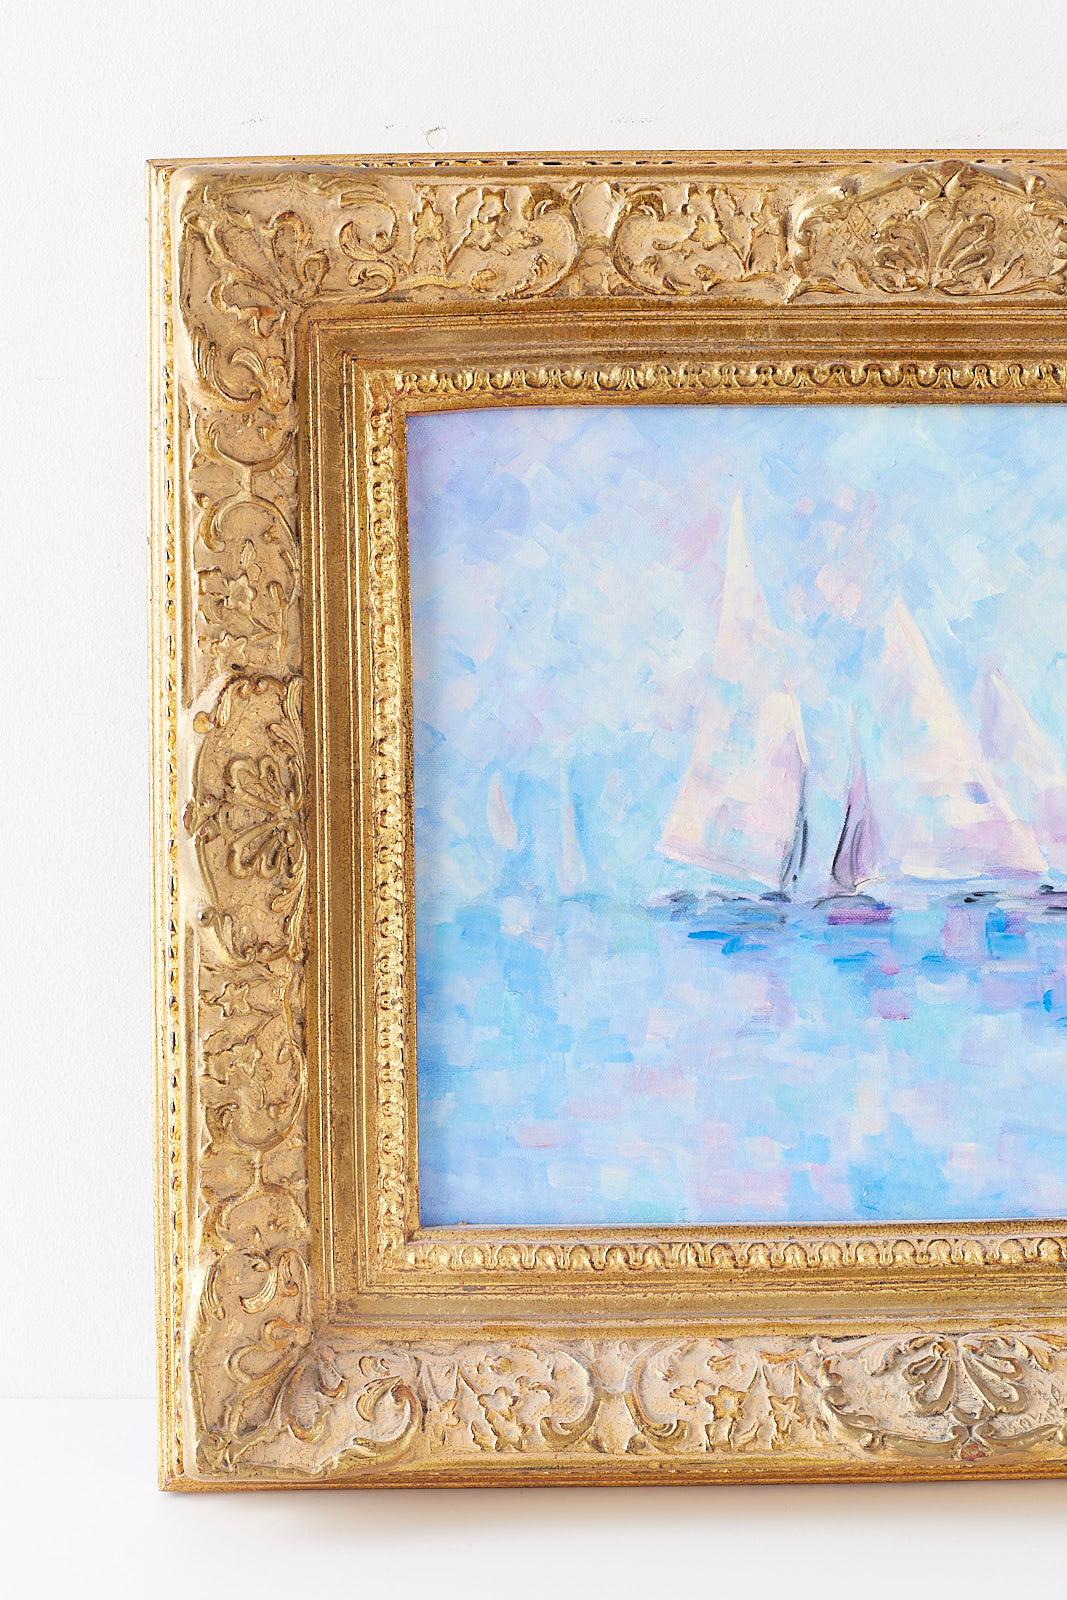 American Midcentury Oil on Canvas Painting of Sailboats